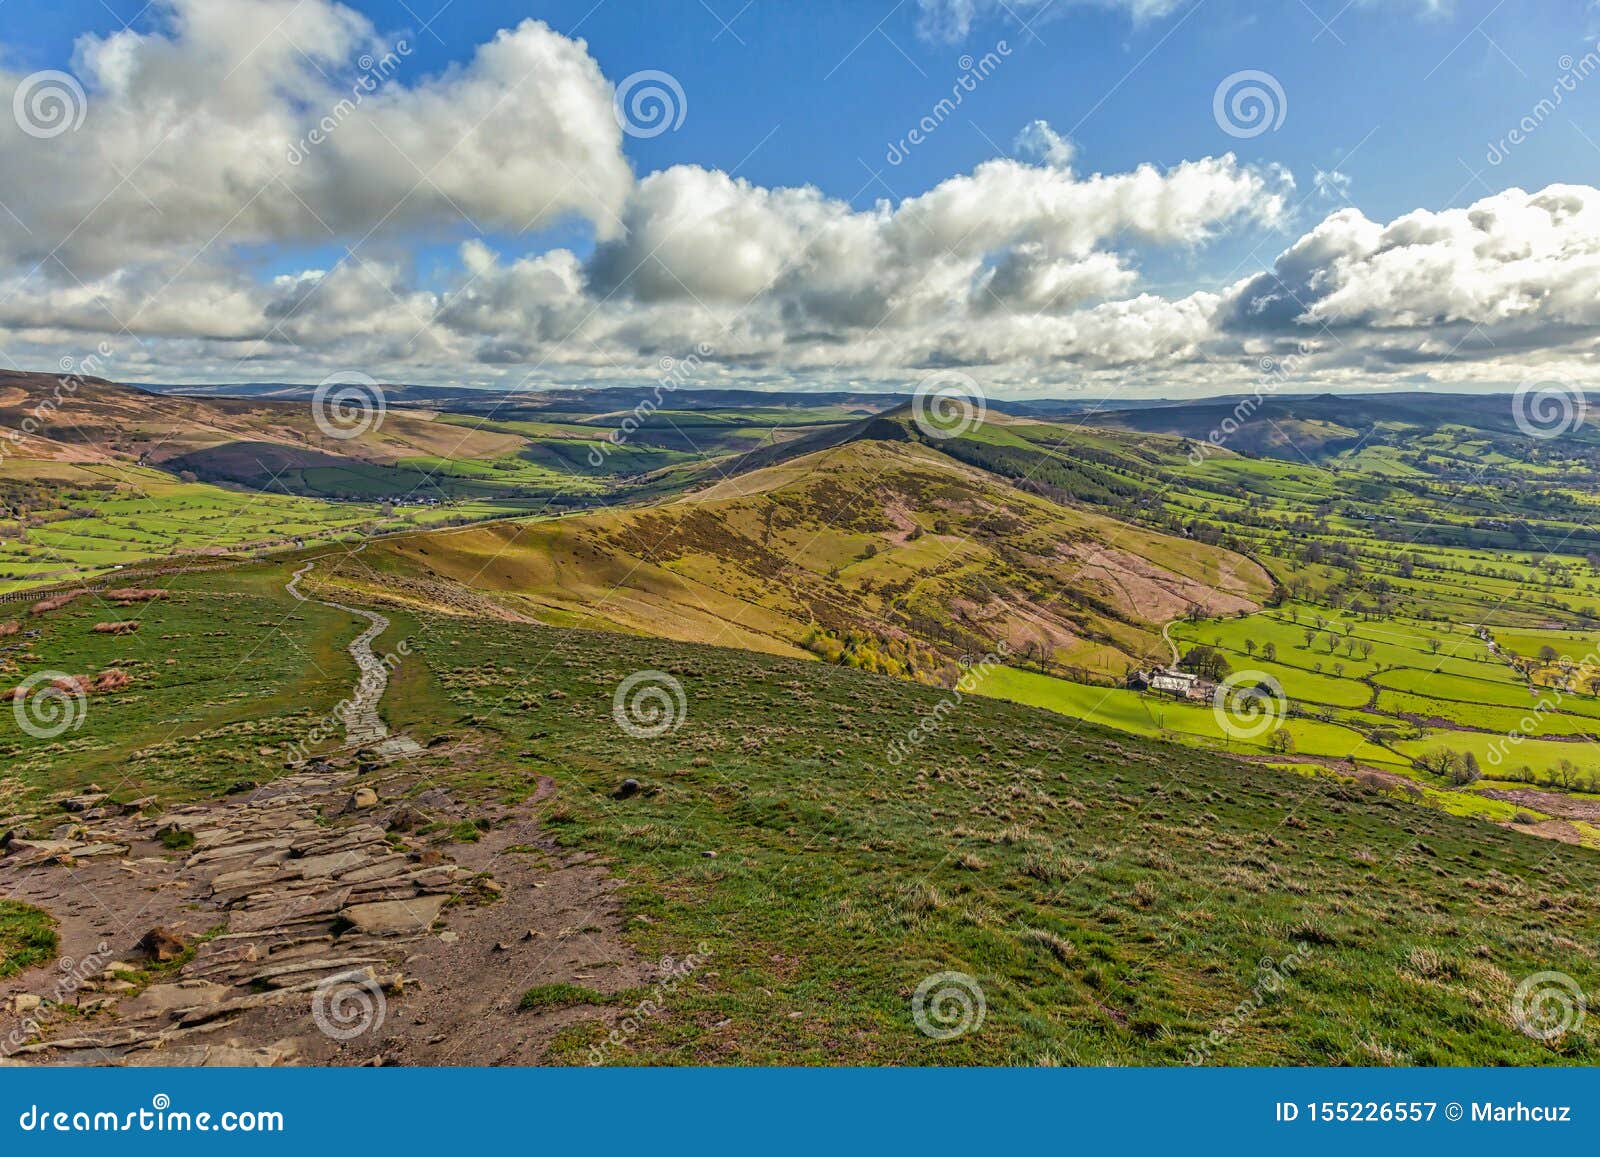 kinder scout trail seen from mam tor